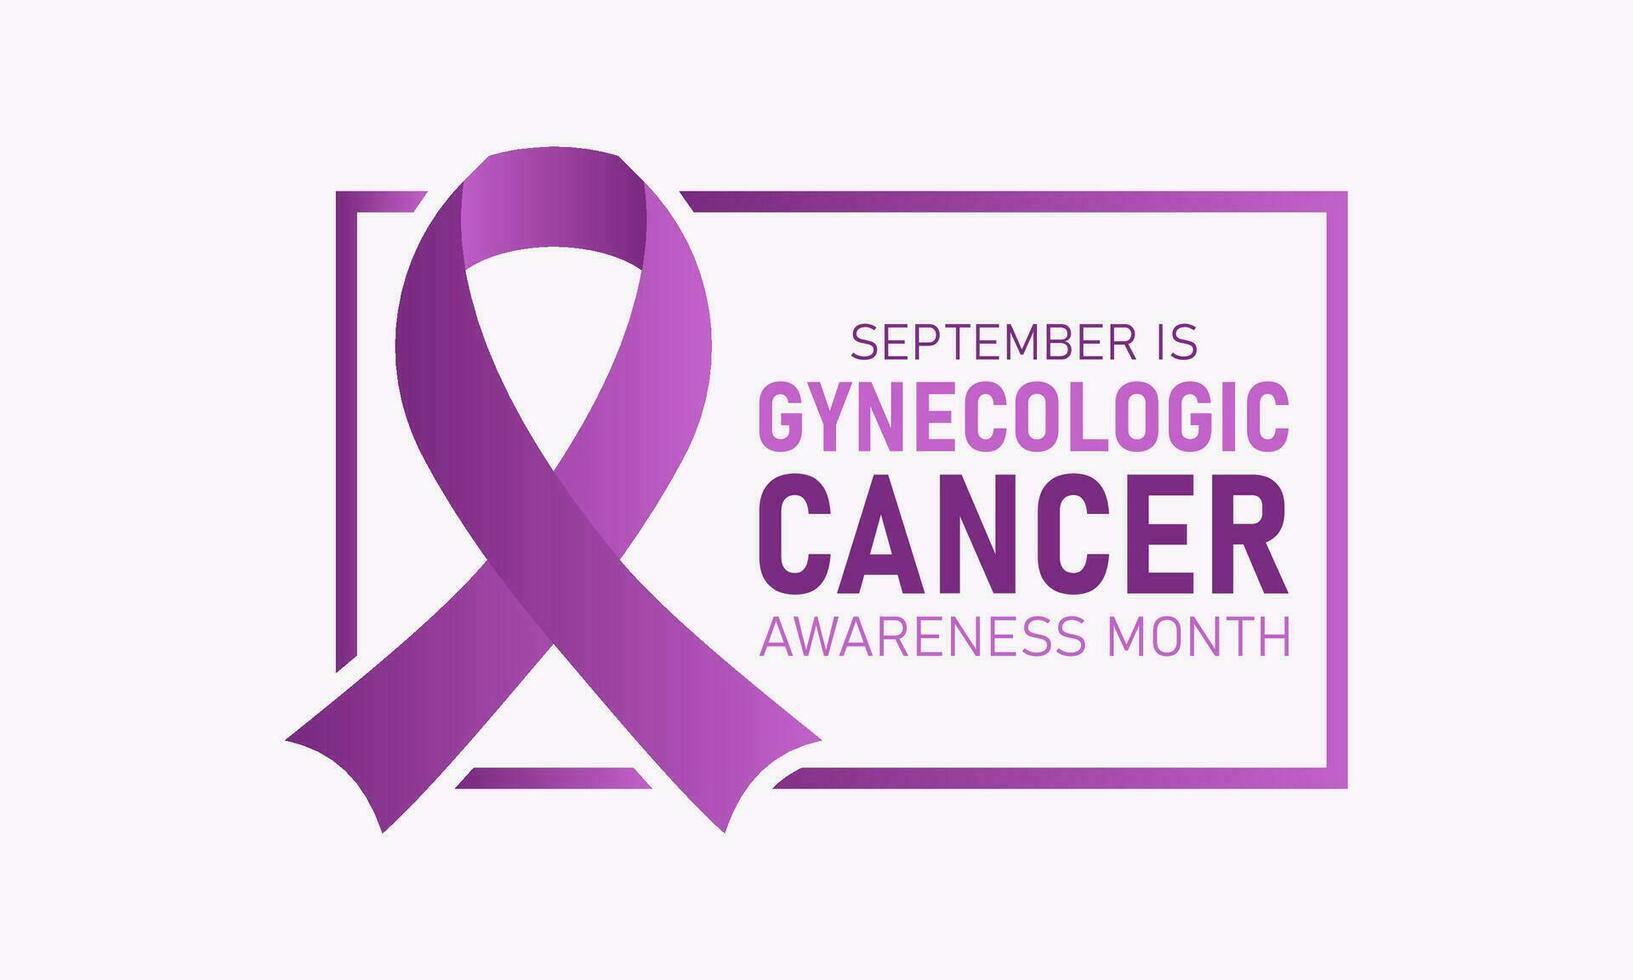 Gynecologic cancer awareness month is observed every year in september. Female reproductive system symbol. Template for banner, card, background. Vector illustration.